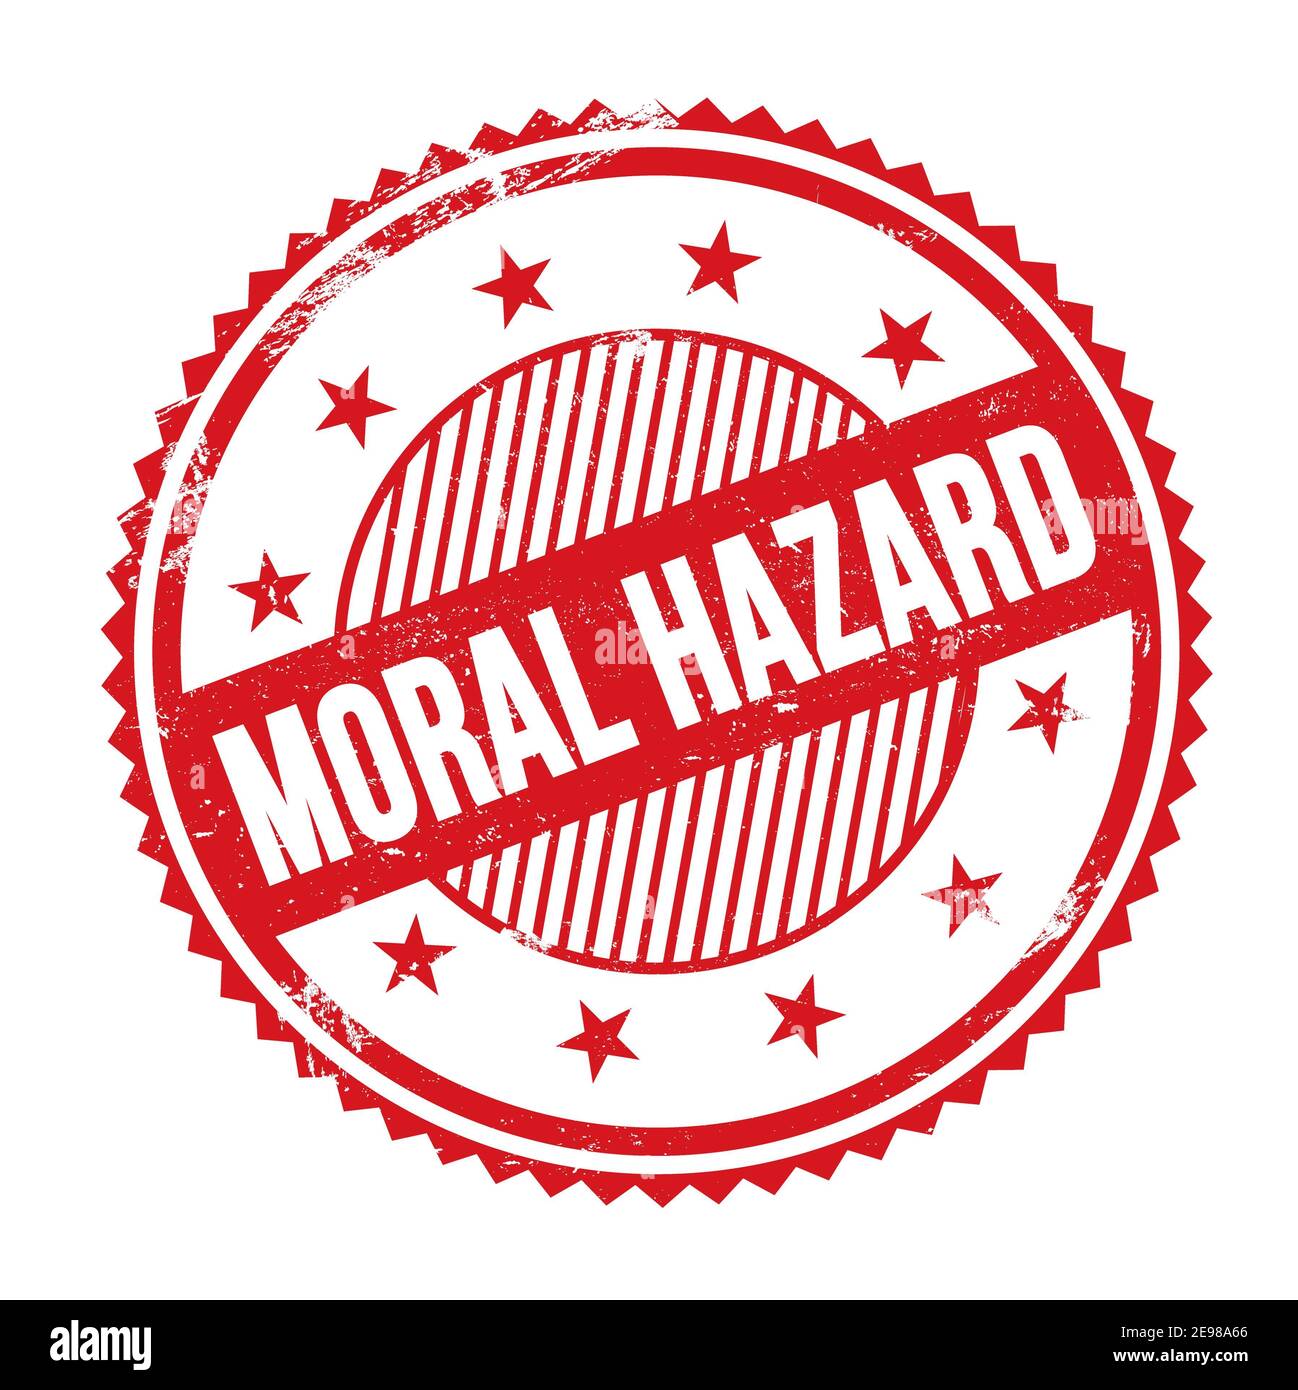 MORAL HAZARD text written on red grungy zig zag borders round stamp. Stock Photo